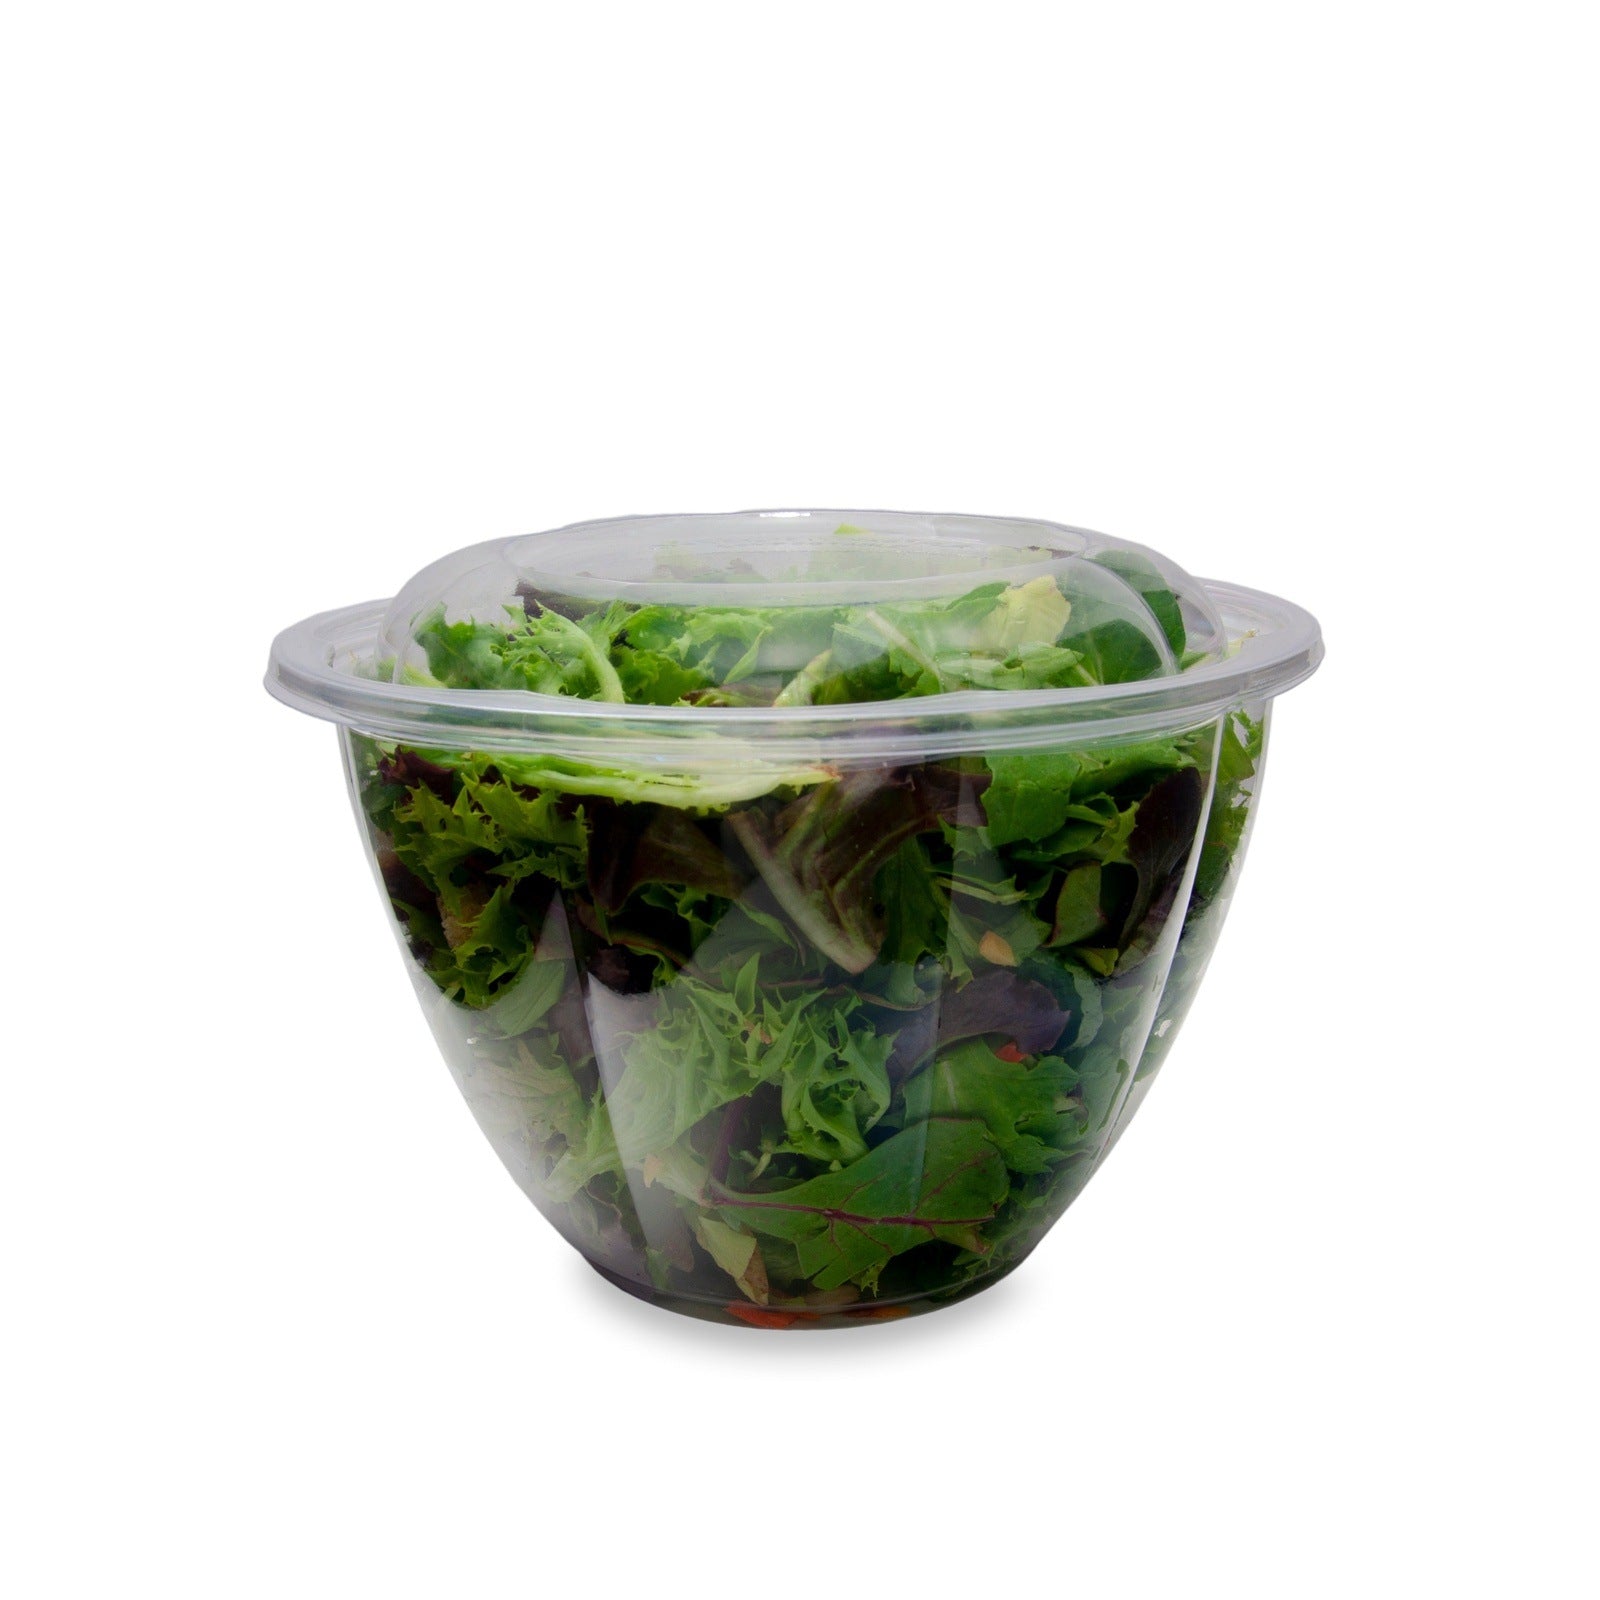 Clear Plastic Salad Bowls with Lids Disposable Takeout Container for Fruit  Salads, Quinoa, Lunch and Meal Prep › Huizhou Shangchen Plastic Products  Co.,Ltd.